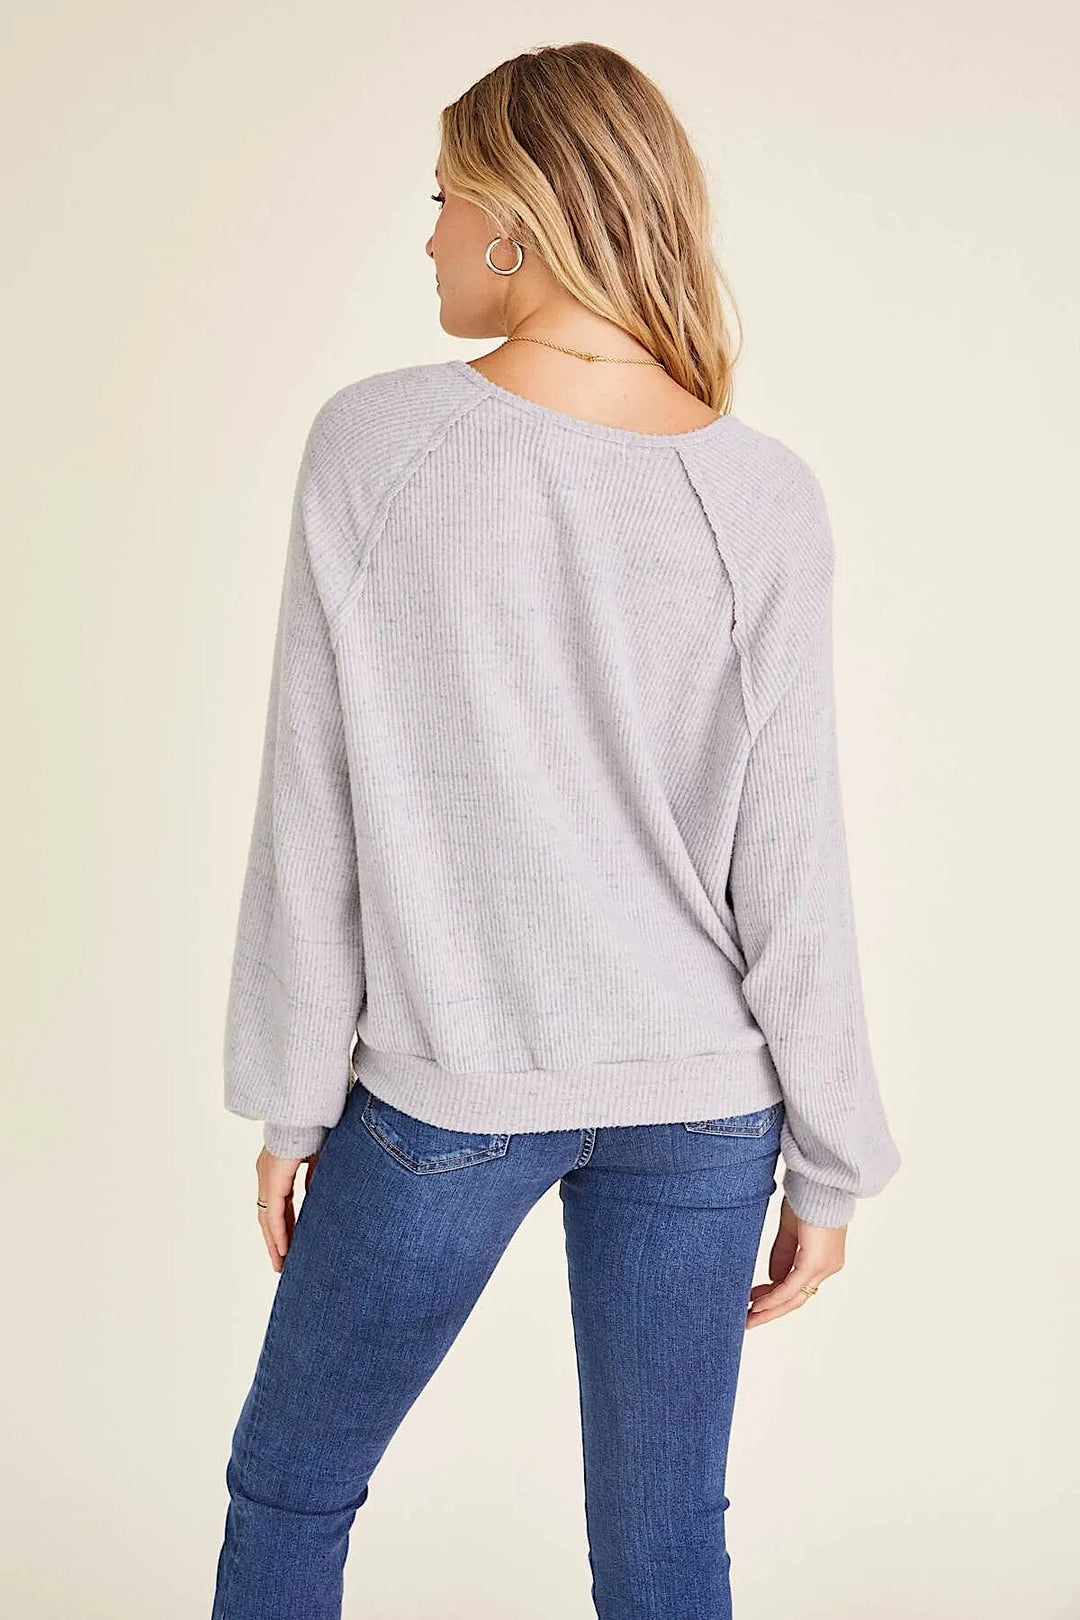 FOLEY COZY RIBBED NOTCH NECK - Kingfisher Road - Online Boutique